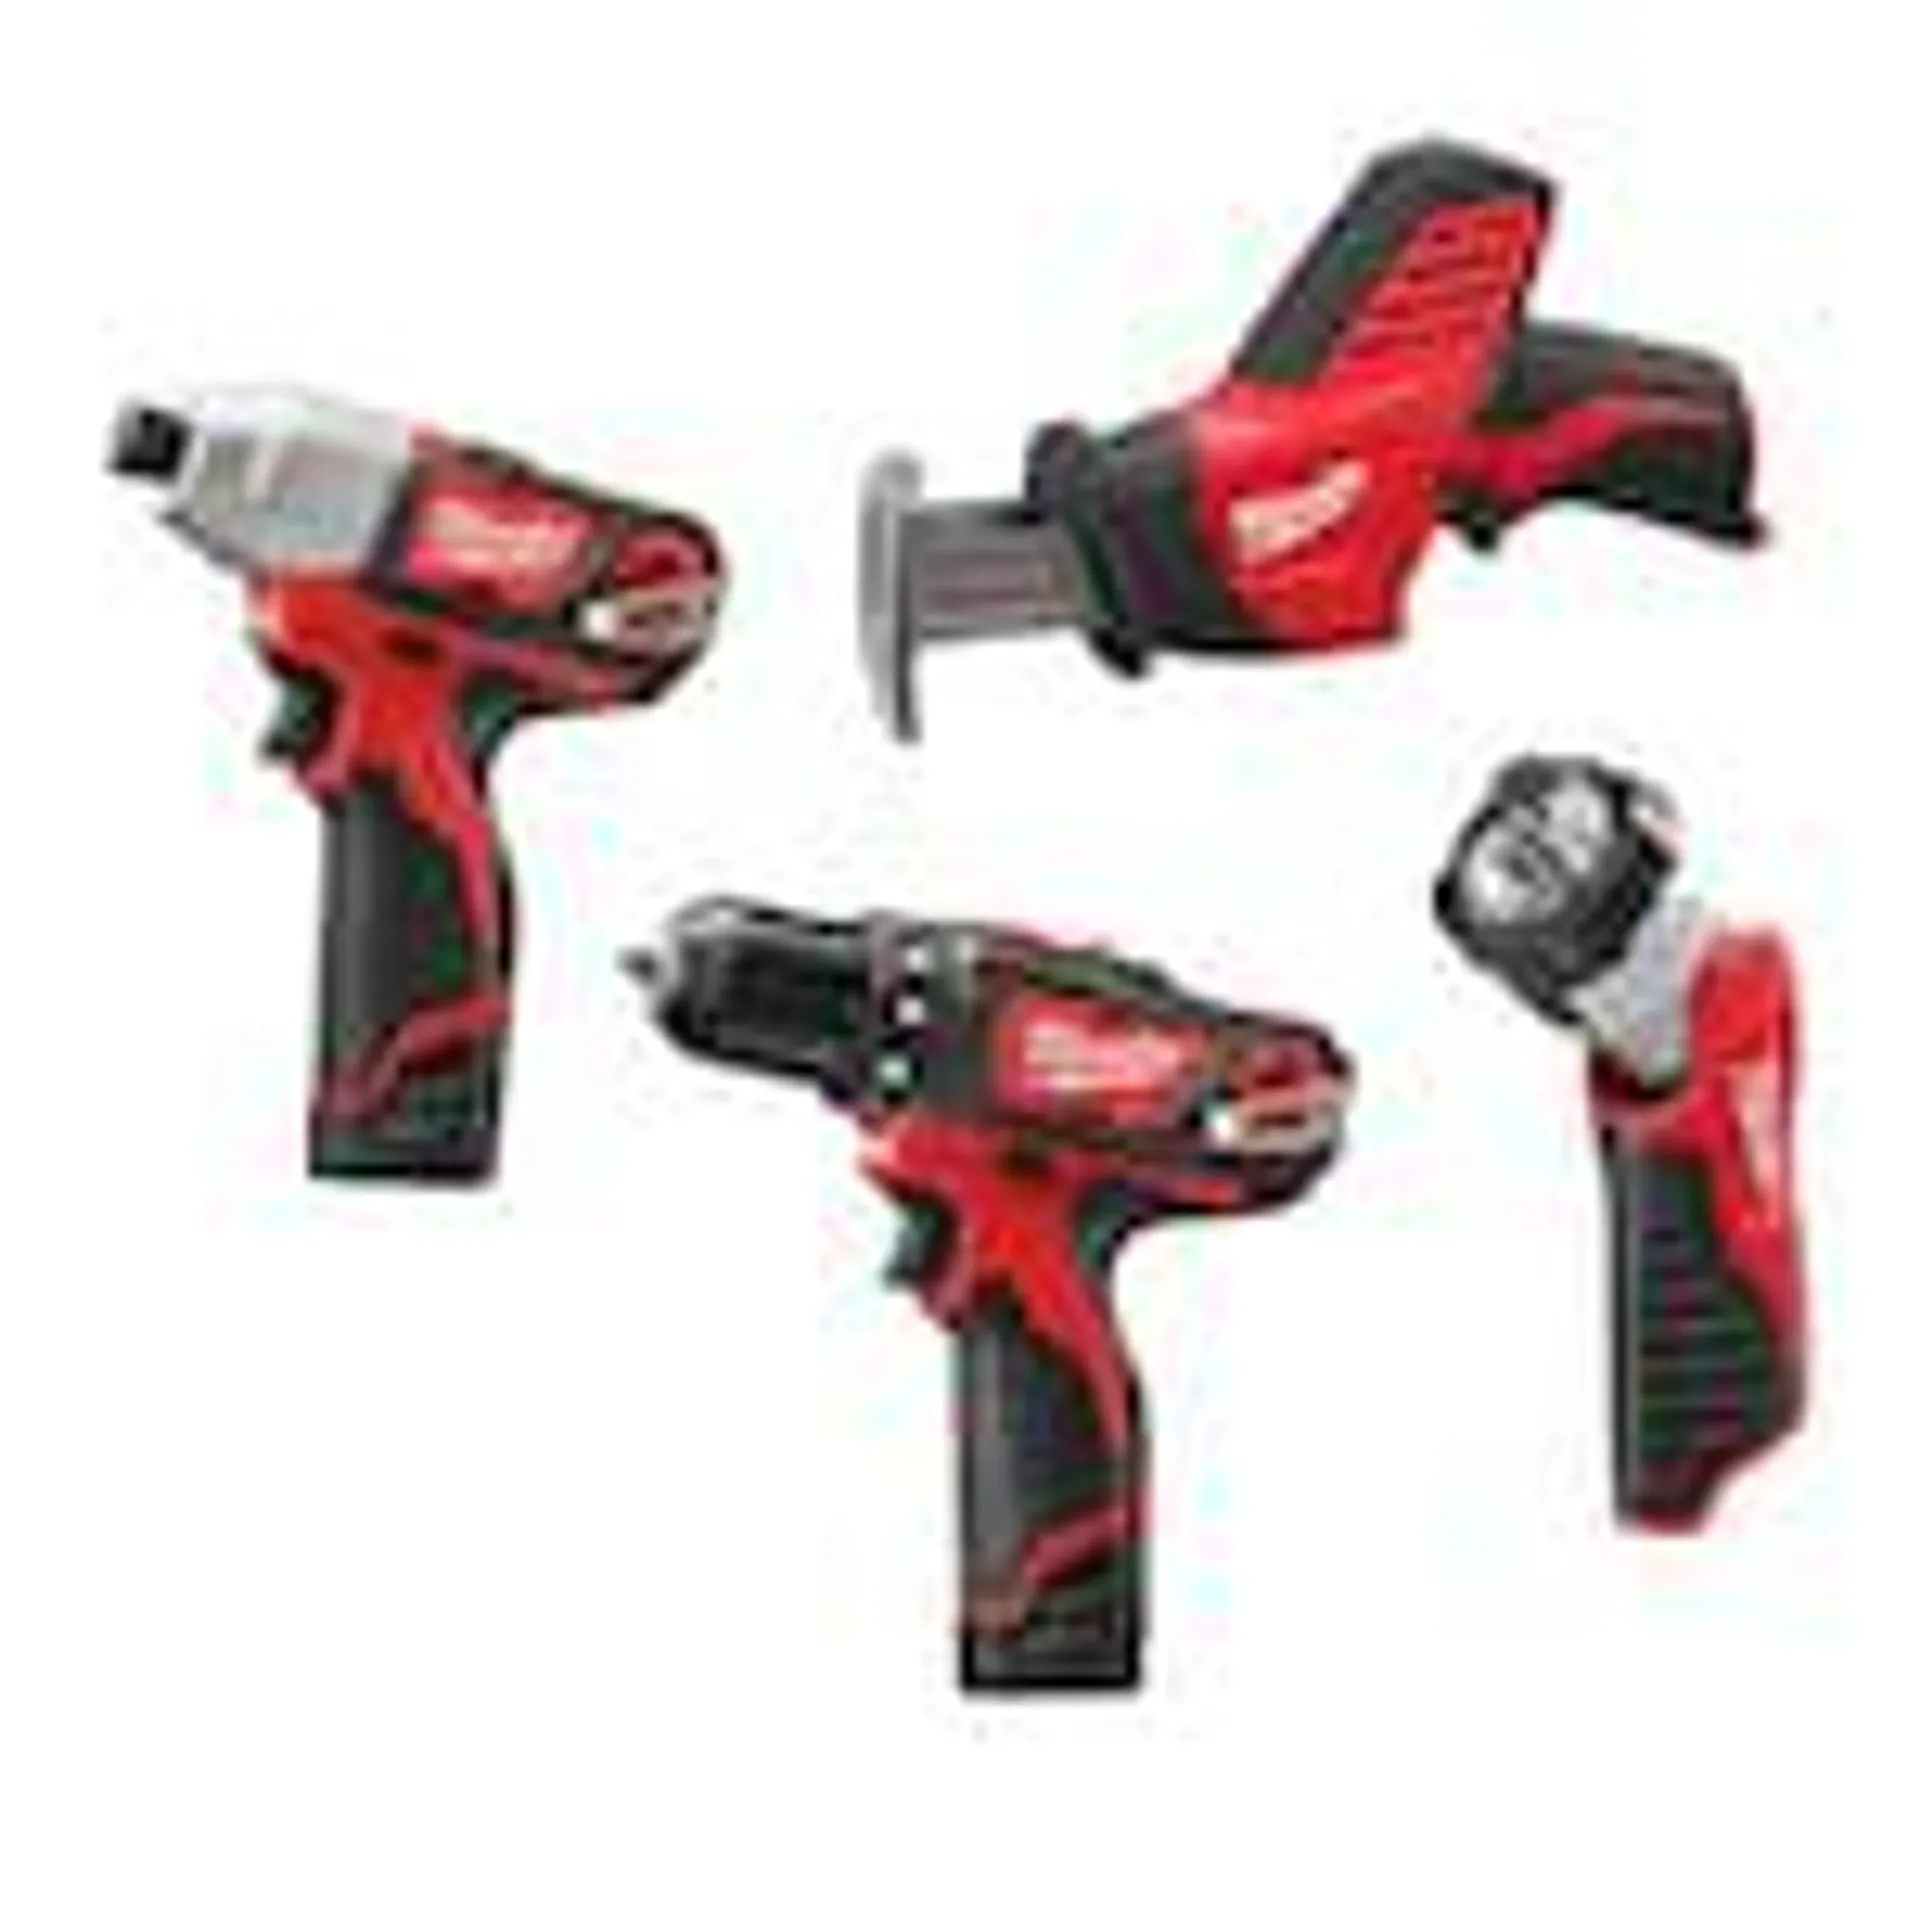 M12 12V Lithium-Ion Cordless 4-Tool Combo Tool Kit with (2) 1.5 Ah Batteries